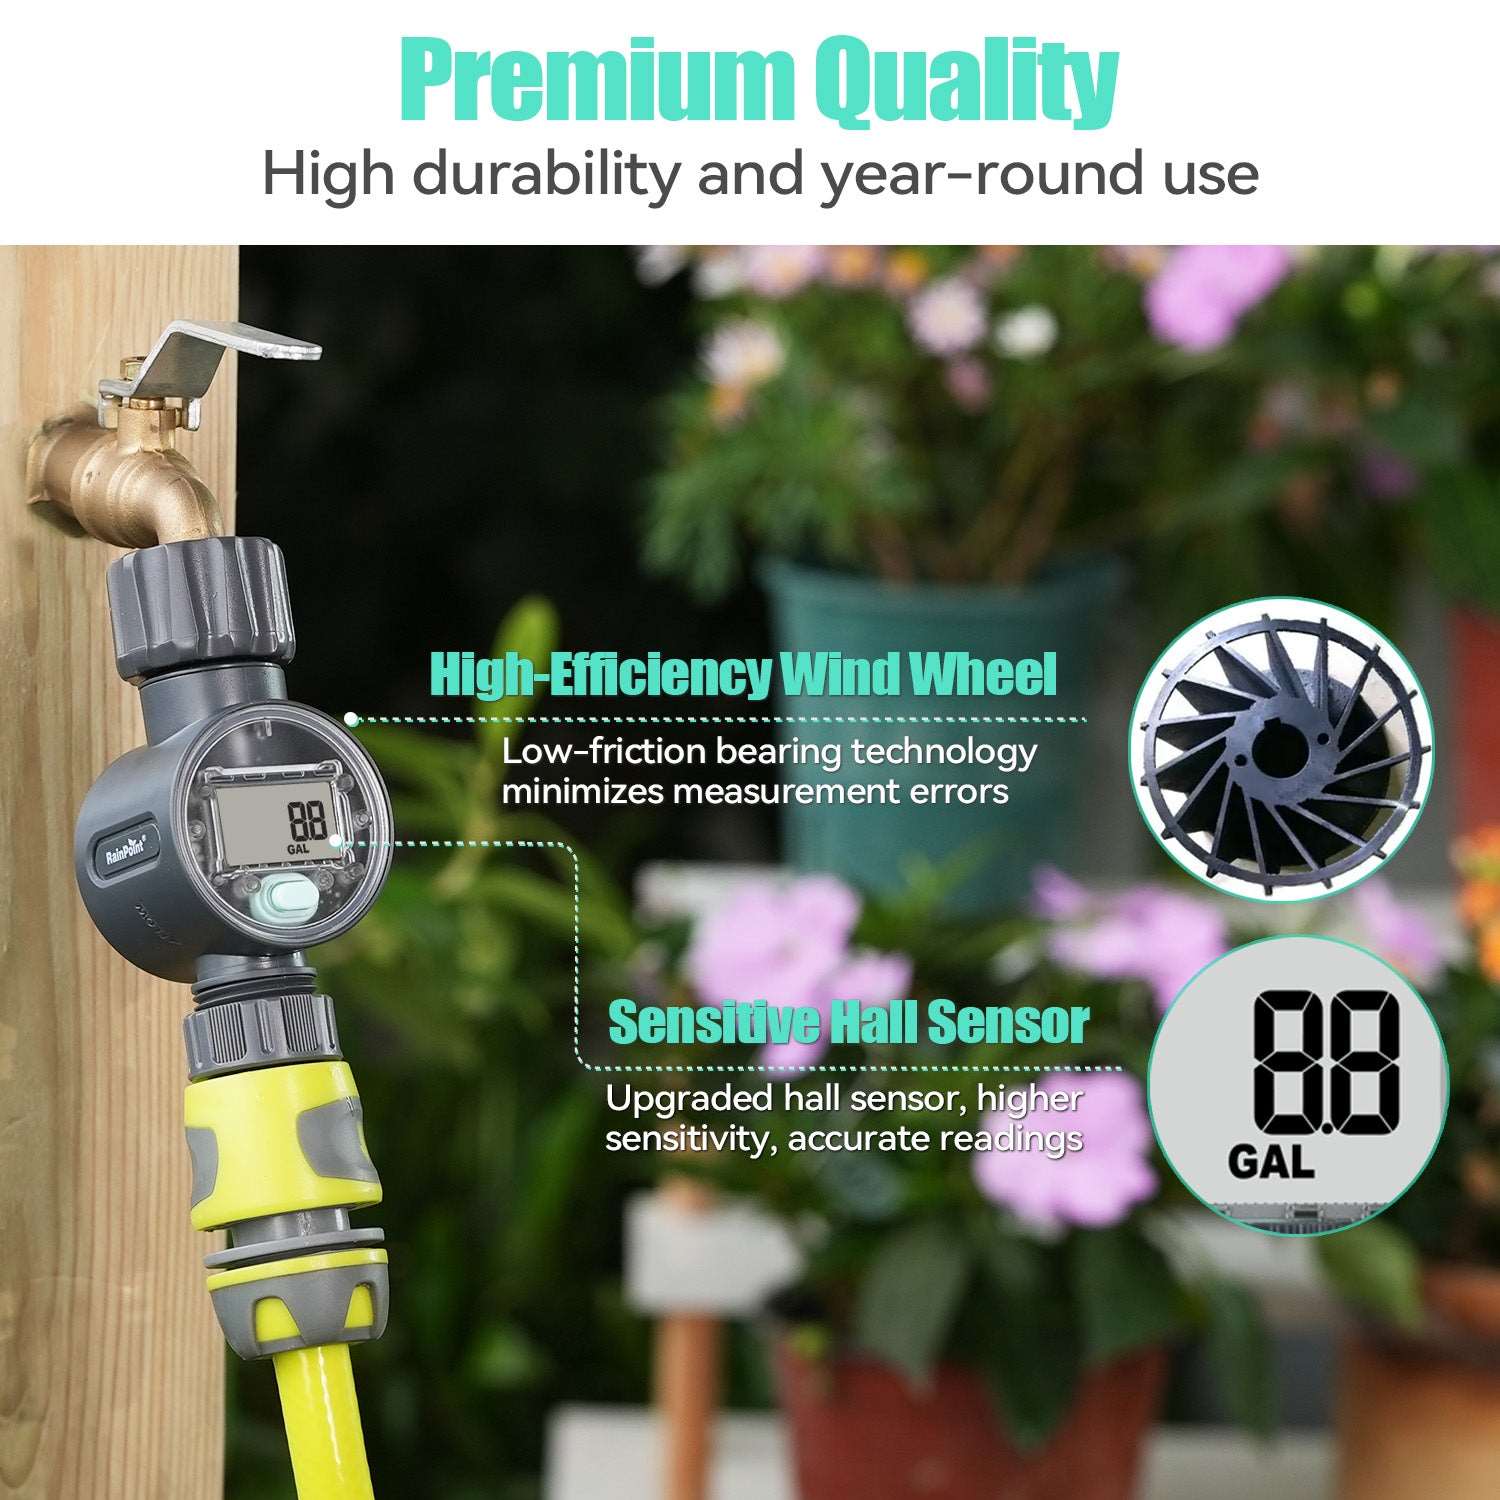 Premium Quality High durability and year-round use3